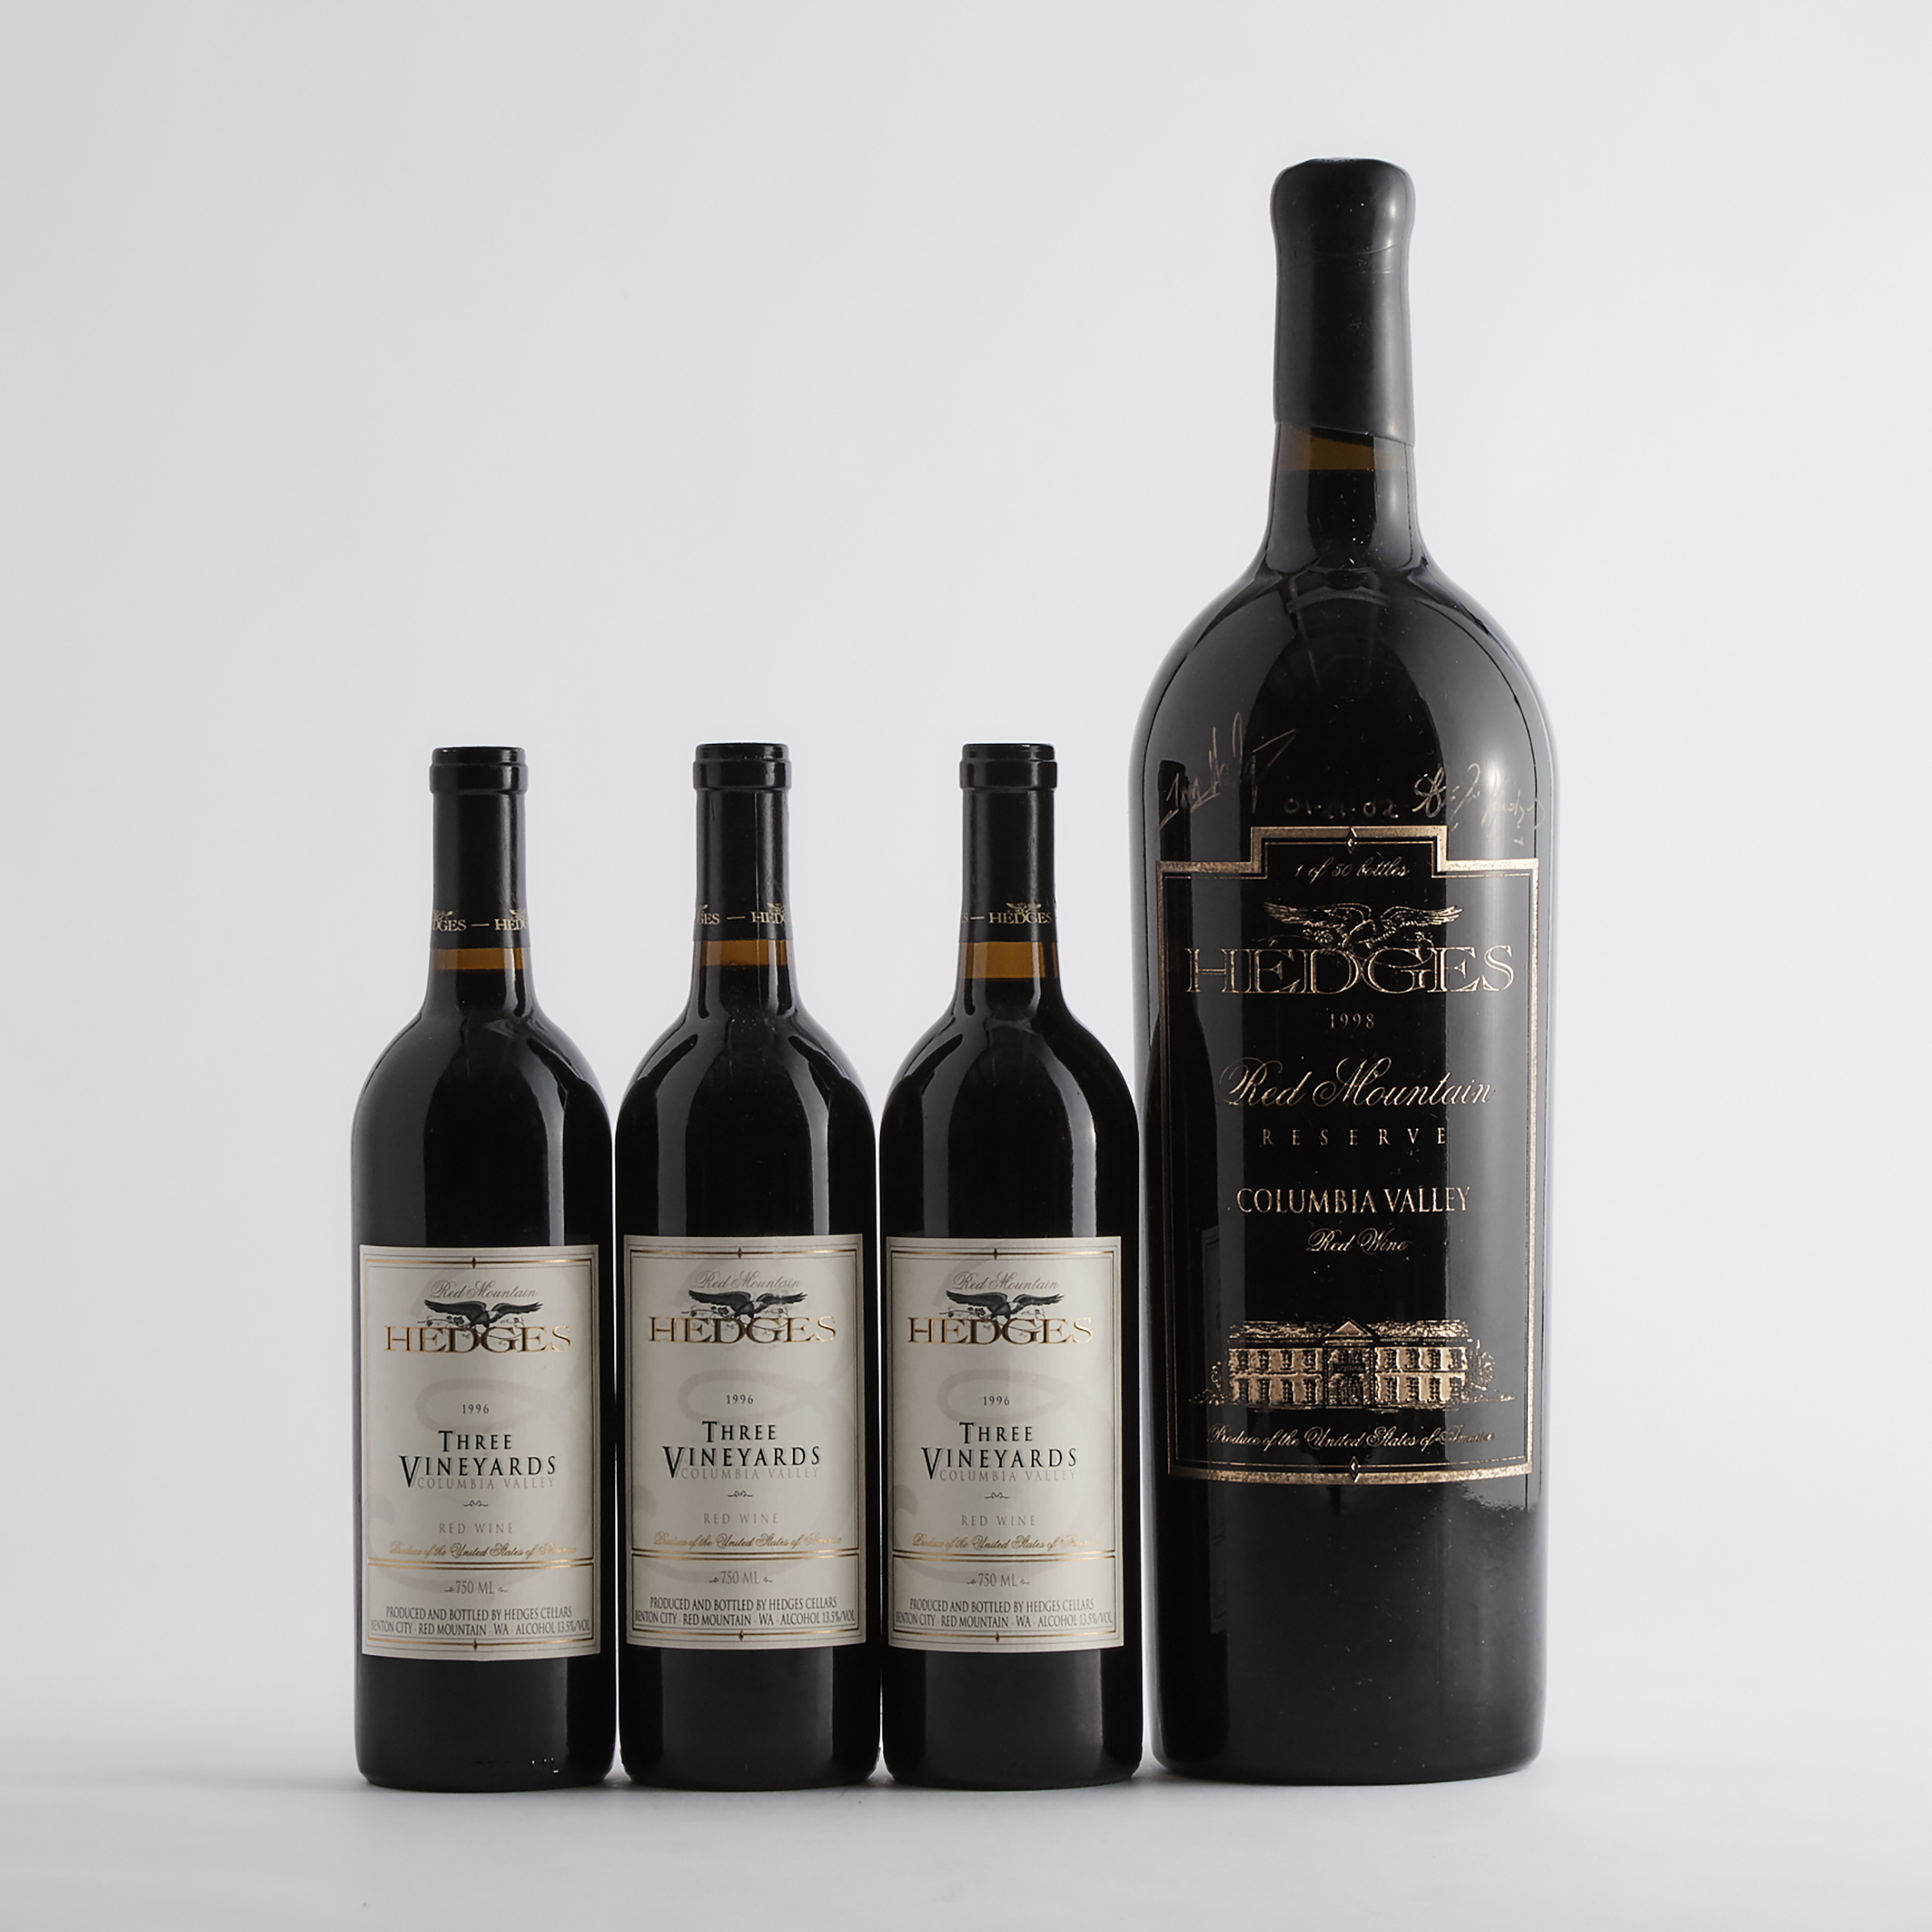 HEDGES FAMILY ESTATE RED MOUNTAIN RESERVE 1998 (1 3 LTR.)
HEDGES FAMILY ESTATE THREE VINEYARDS 1996 (3)